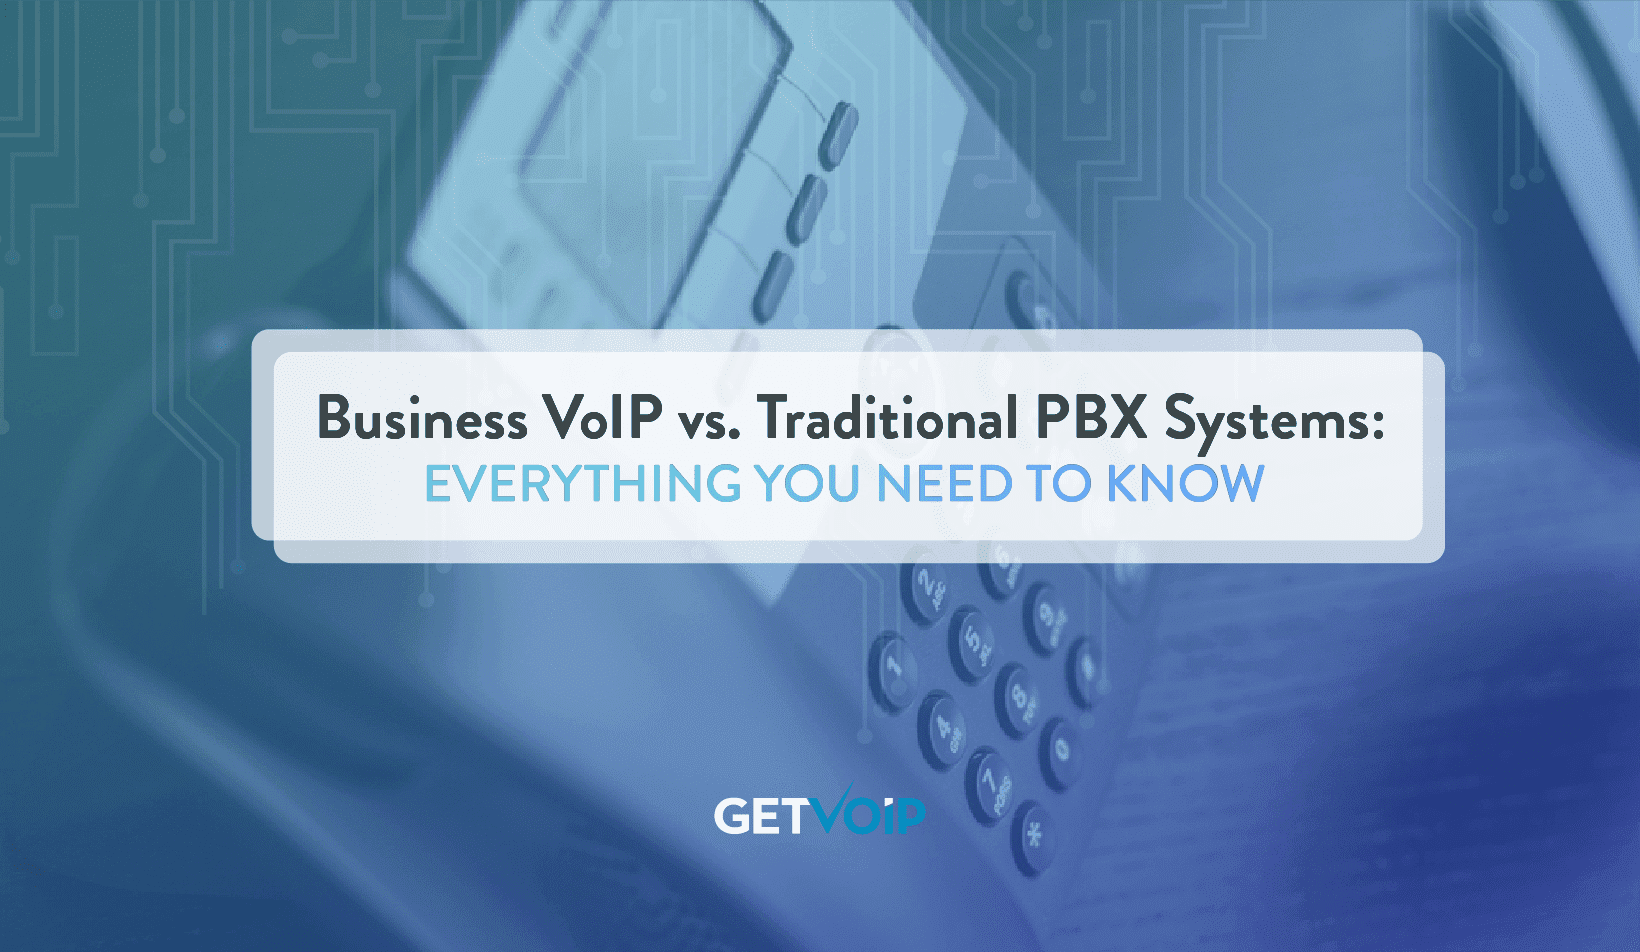 Business VoIP vs Traditional PBX Systems: Everything You Need to Know